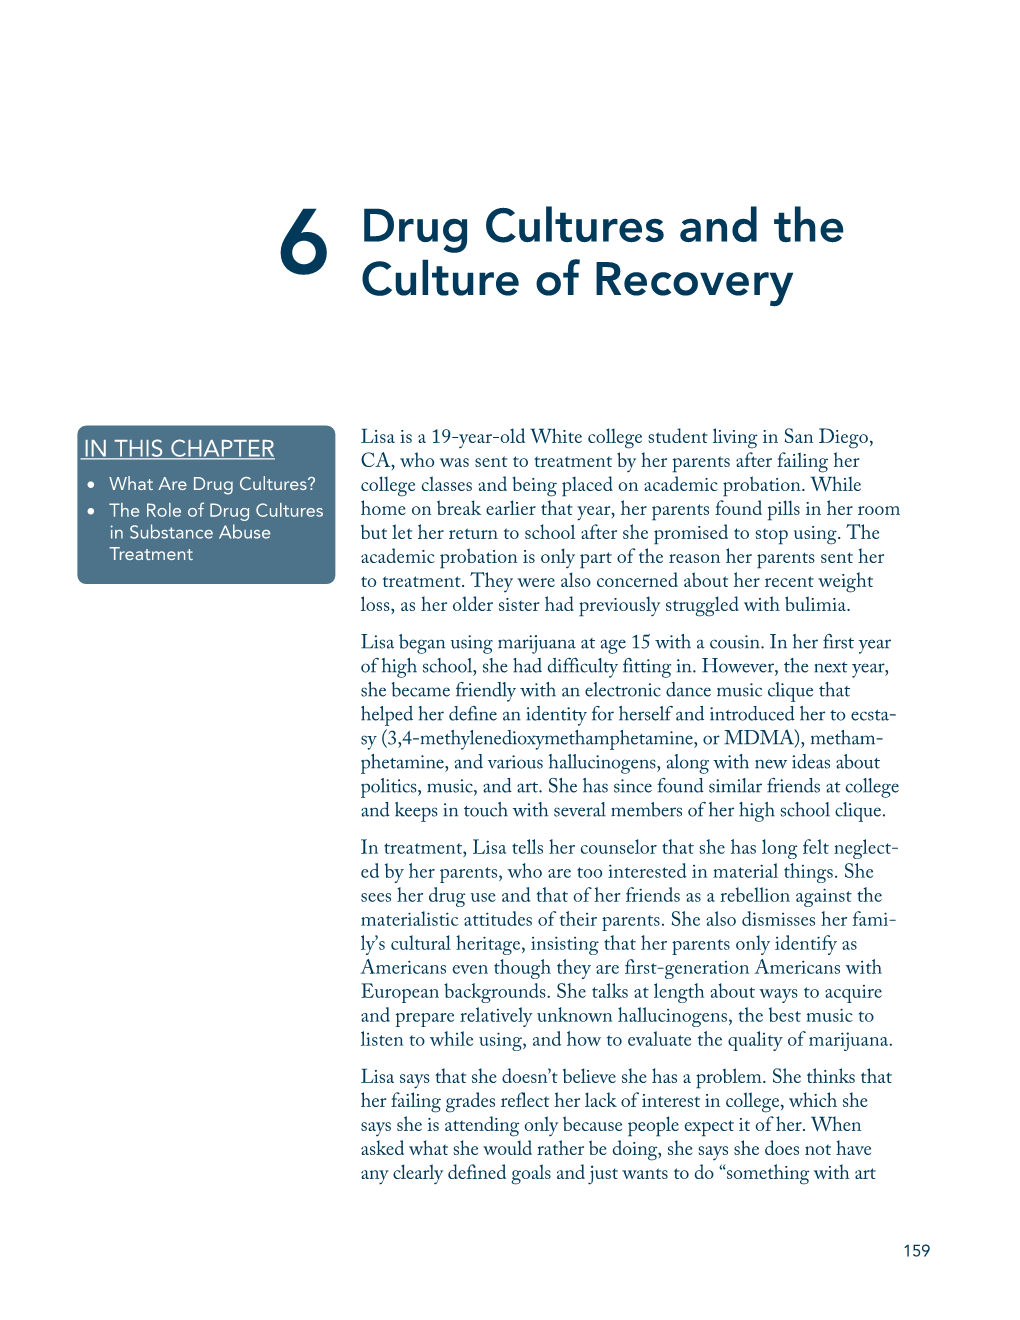 6 Drug Cultures and the Culture of Recovery